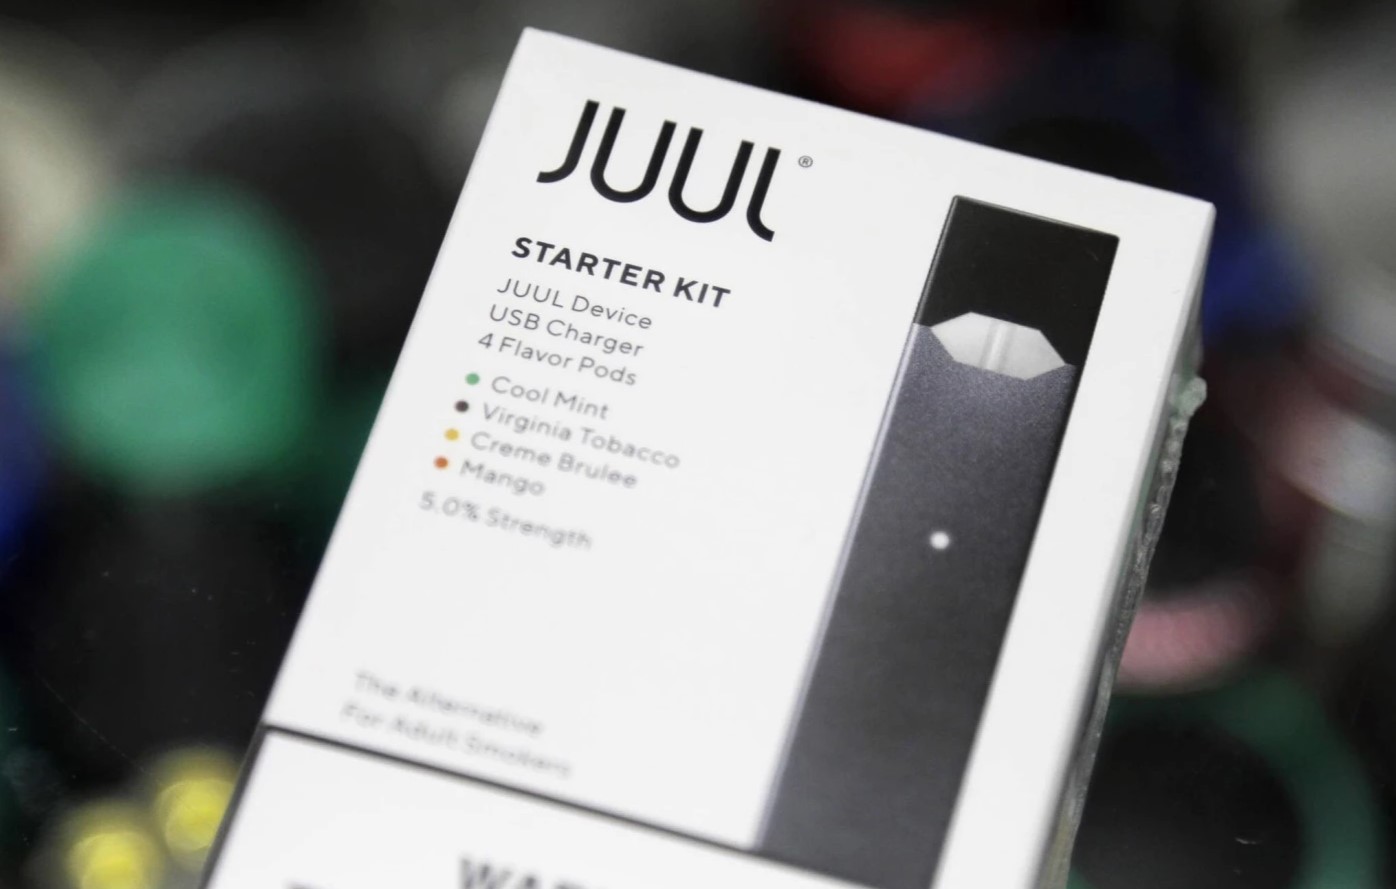 Featured image for “Florida claims Juul improperly marketed to children”